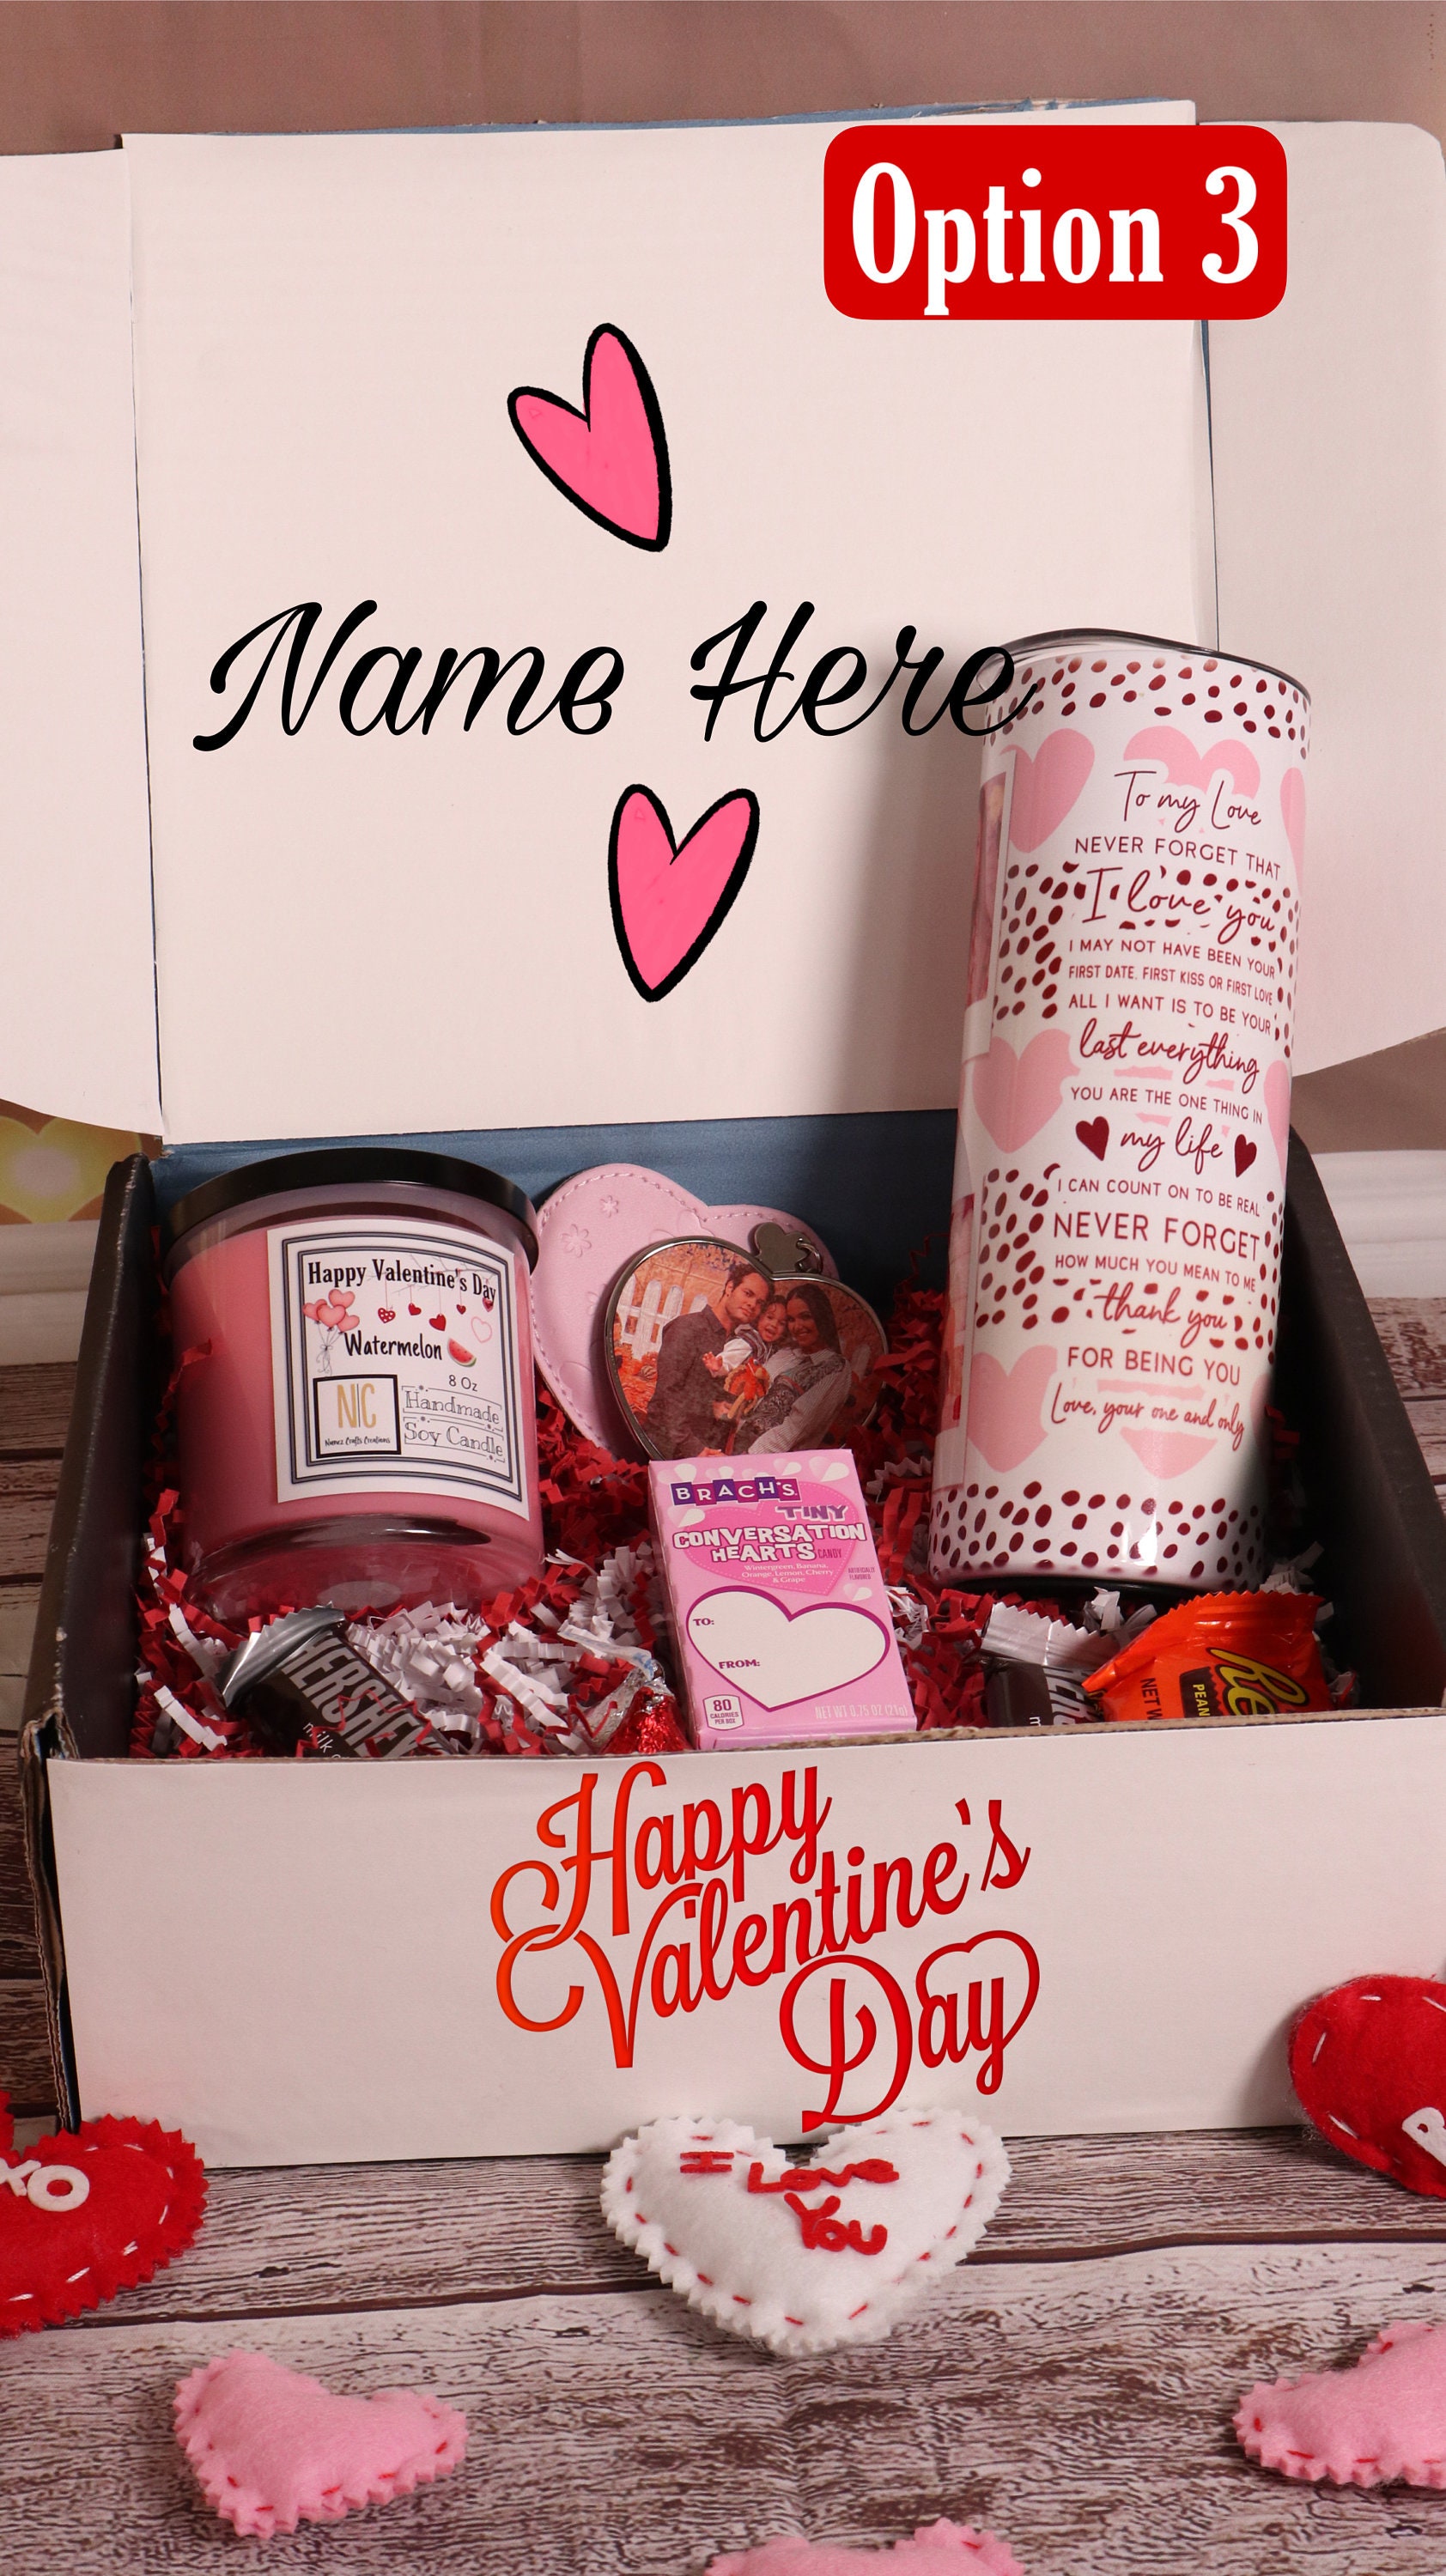 Valentines Gifts Box Valentine Gift for Her Starbucks Valentine's Day Gift  Box Lovers Gift Box Starbucks Cup Gift Set 